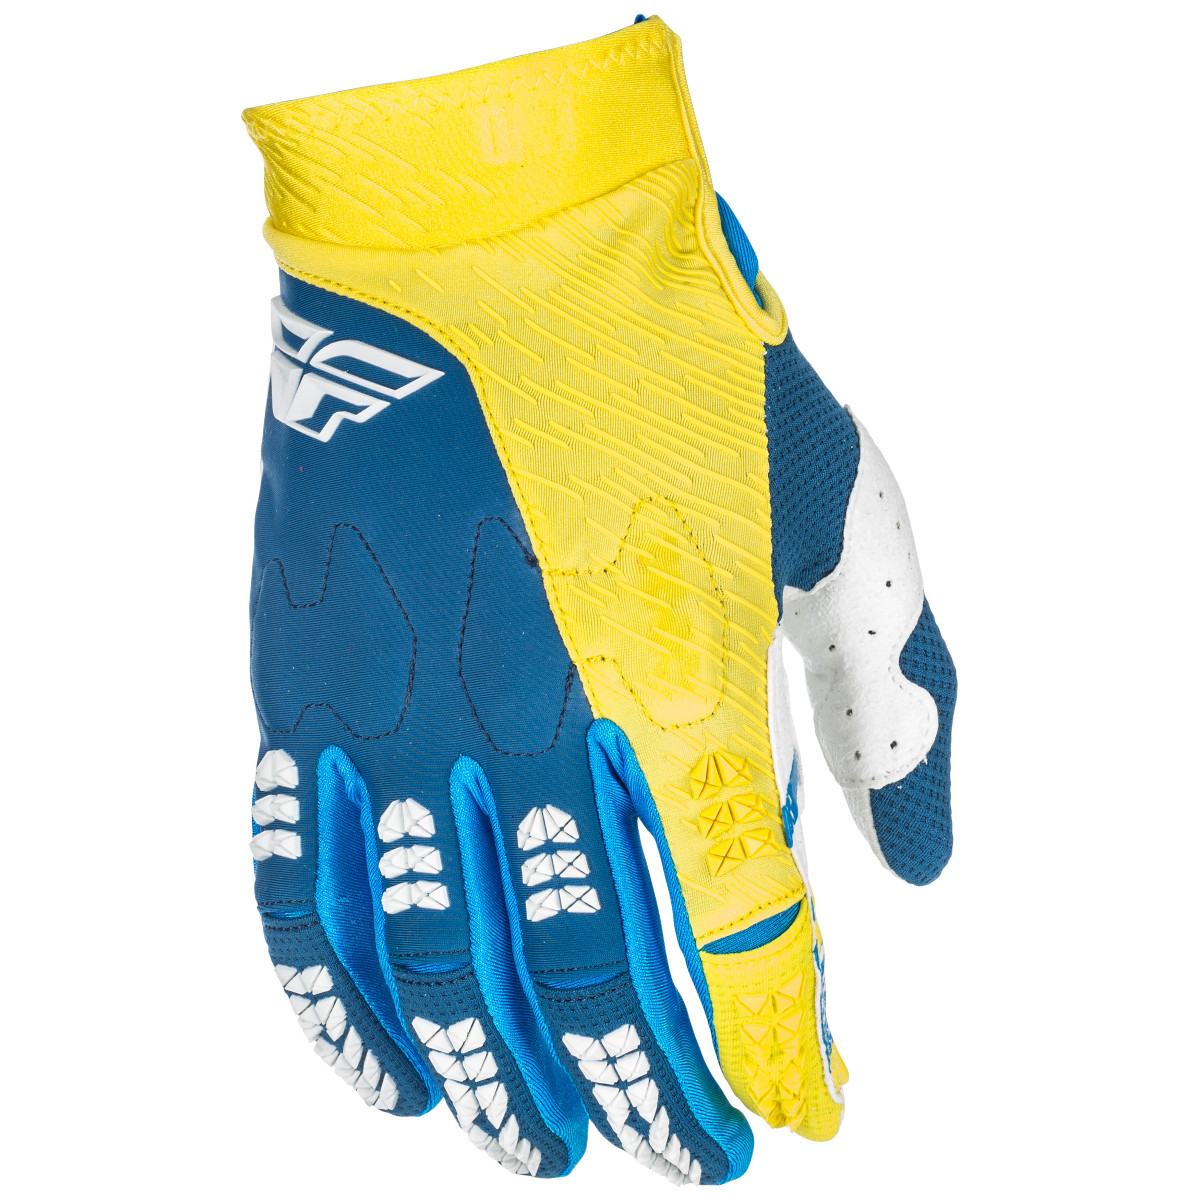 Fly Racing Guanti Evolution 2.0 Navy/Yellow/White